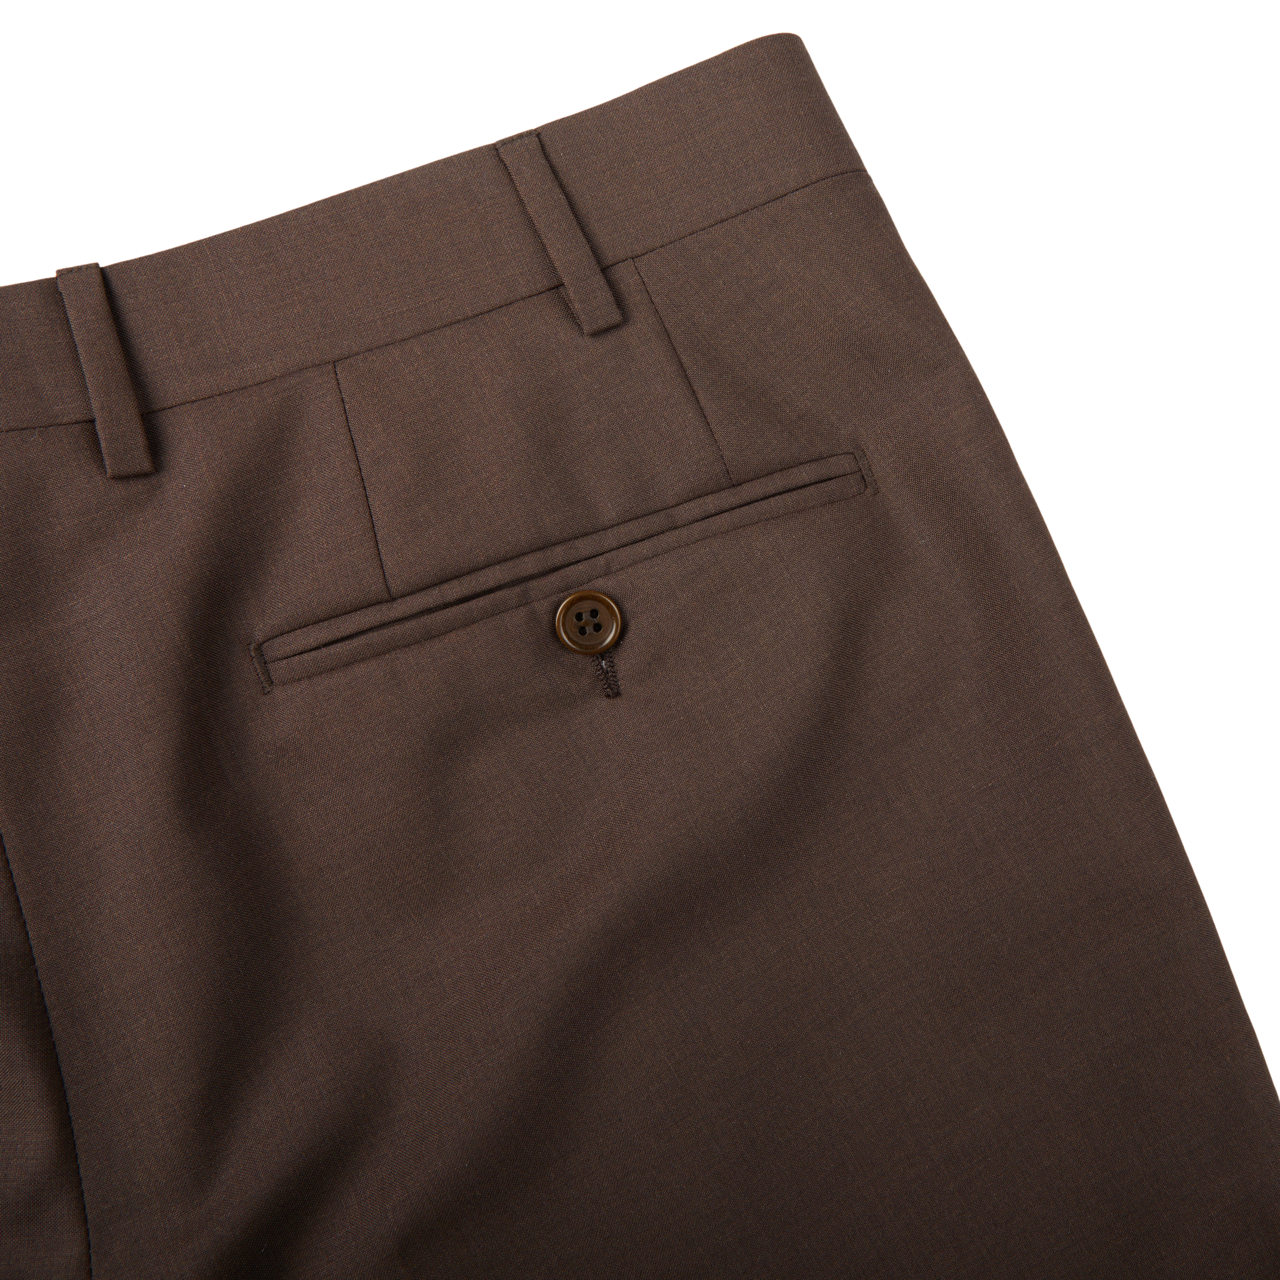 Canali Brown Tropical Wool Single Pleat Trousers Pocket